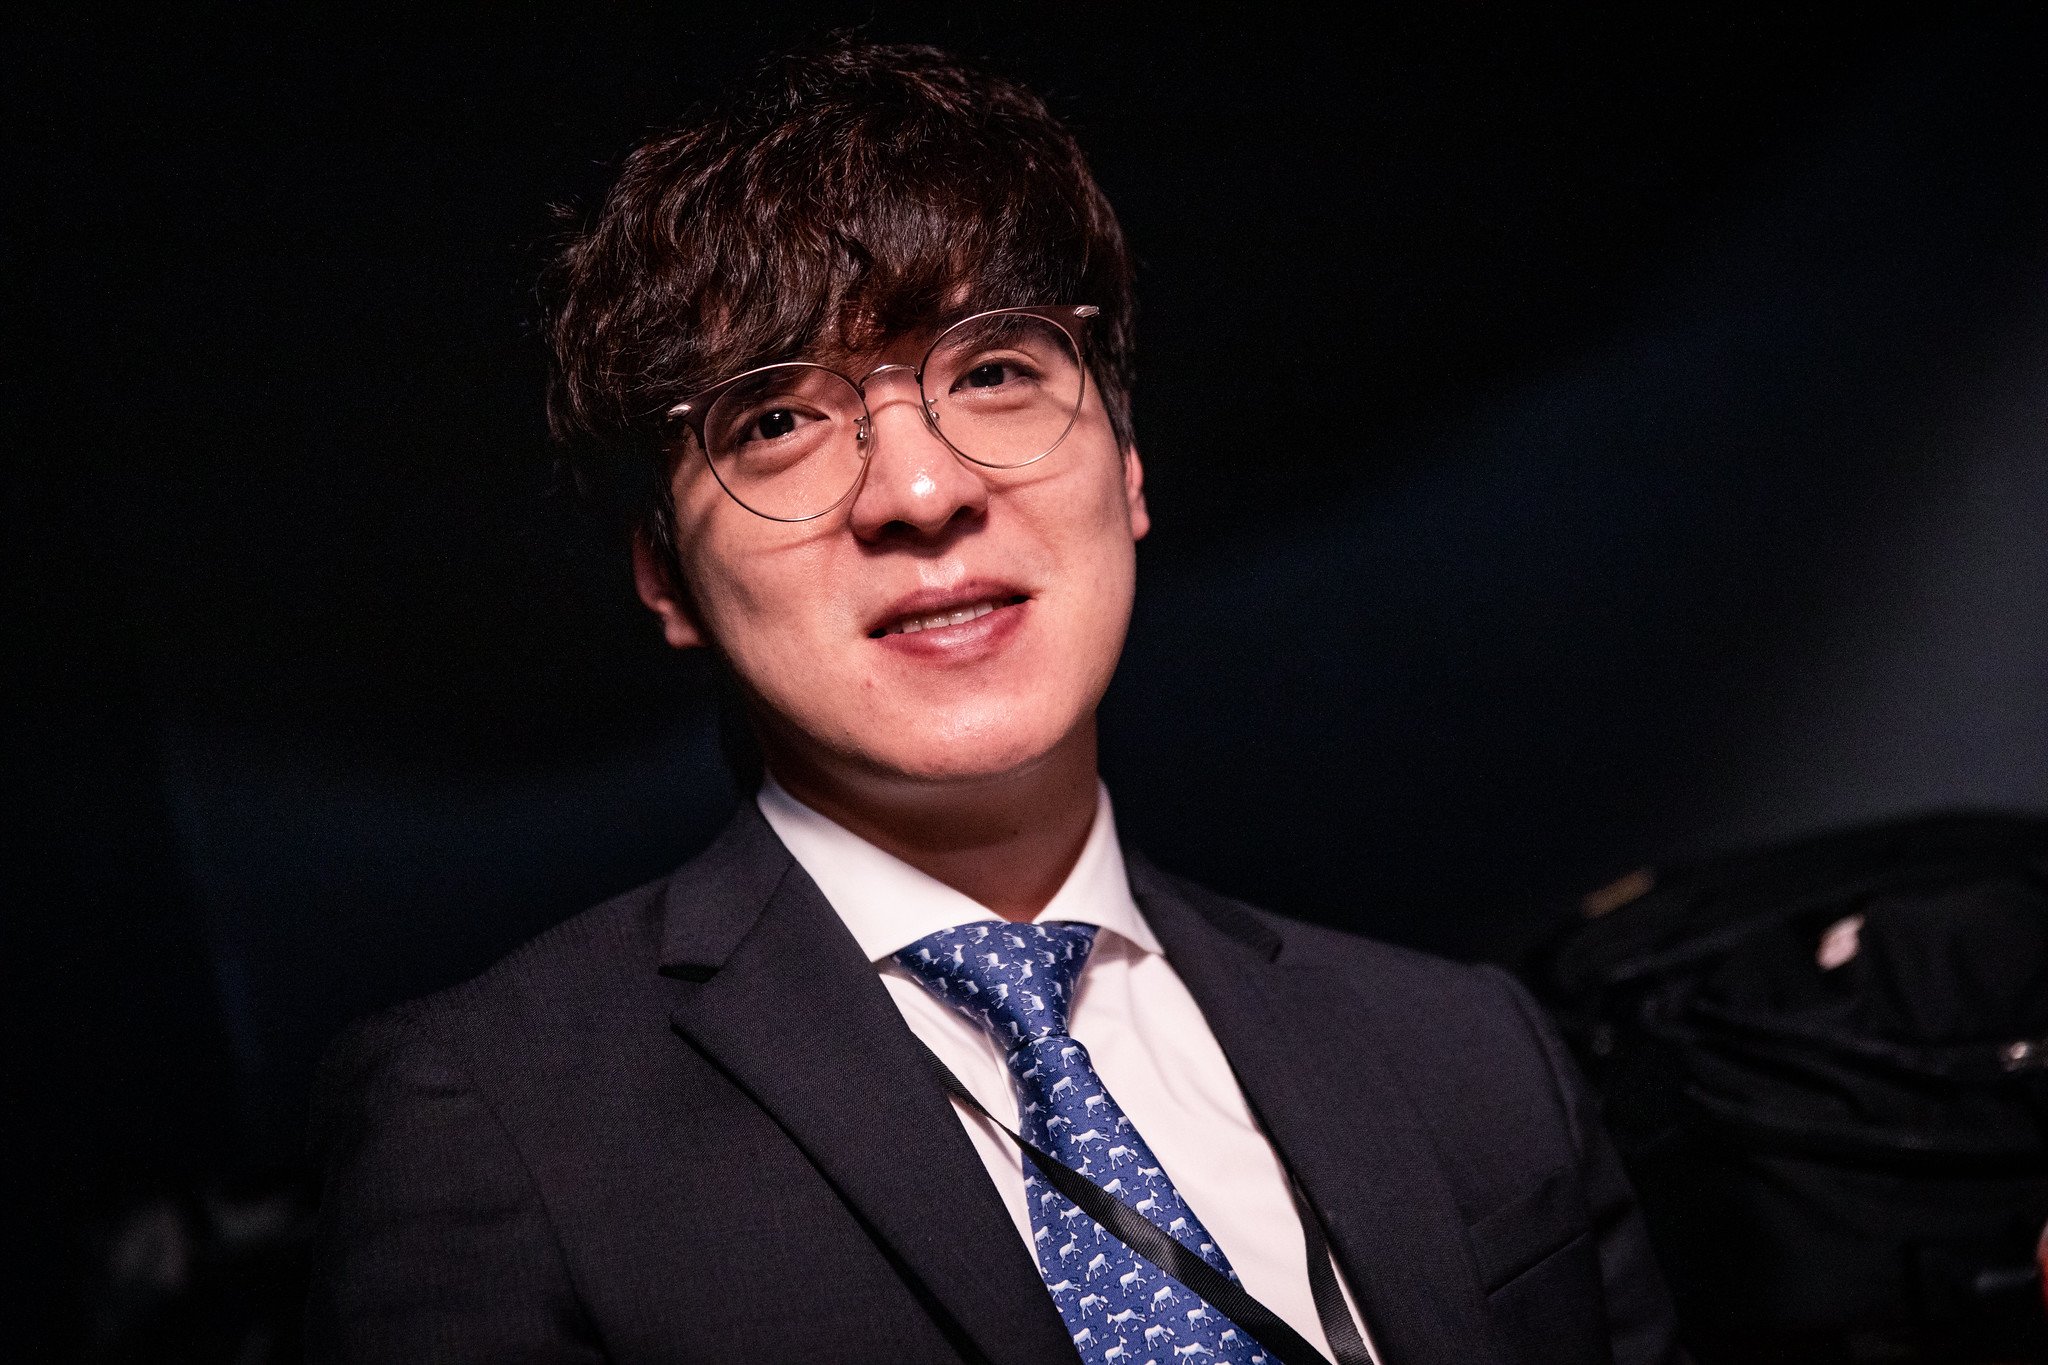 KkOma reportedly set to coach Vici Gaming in 2020 - Dot Esports